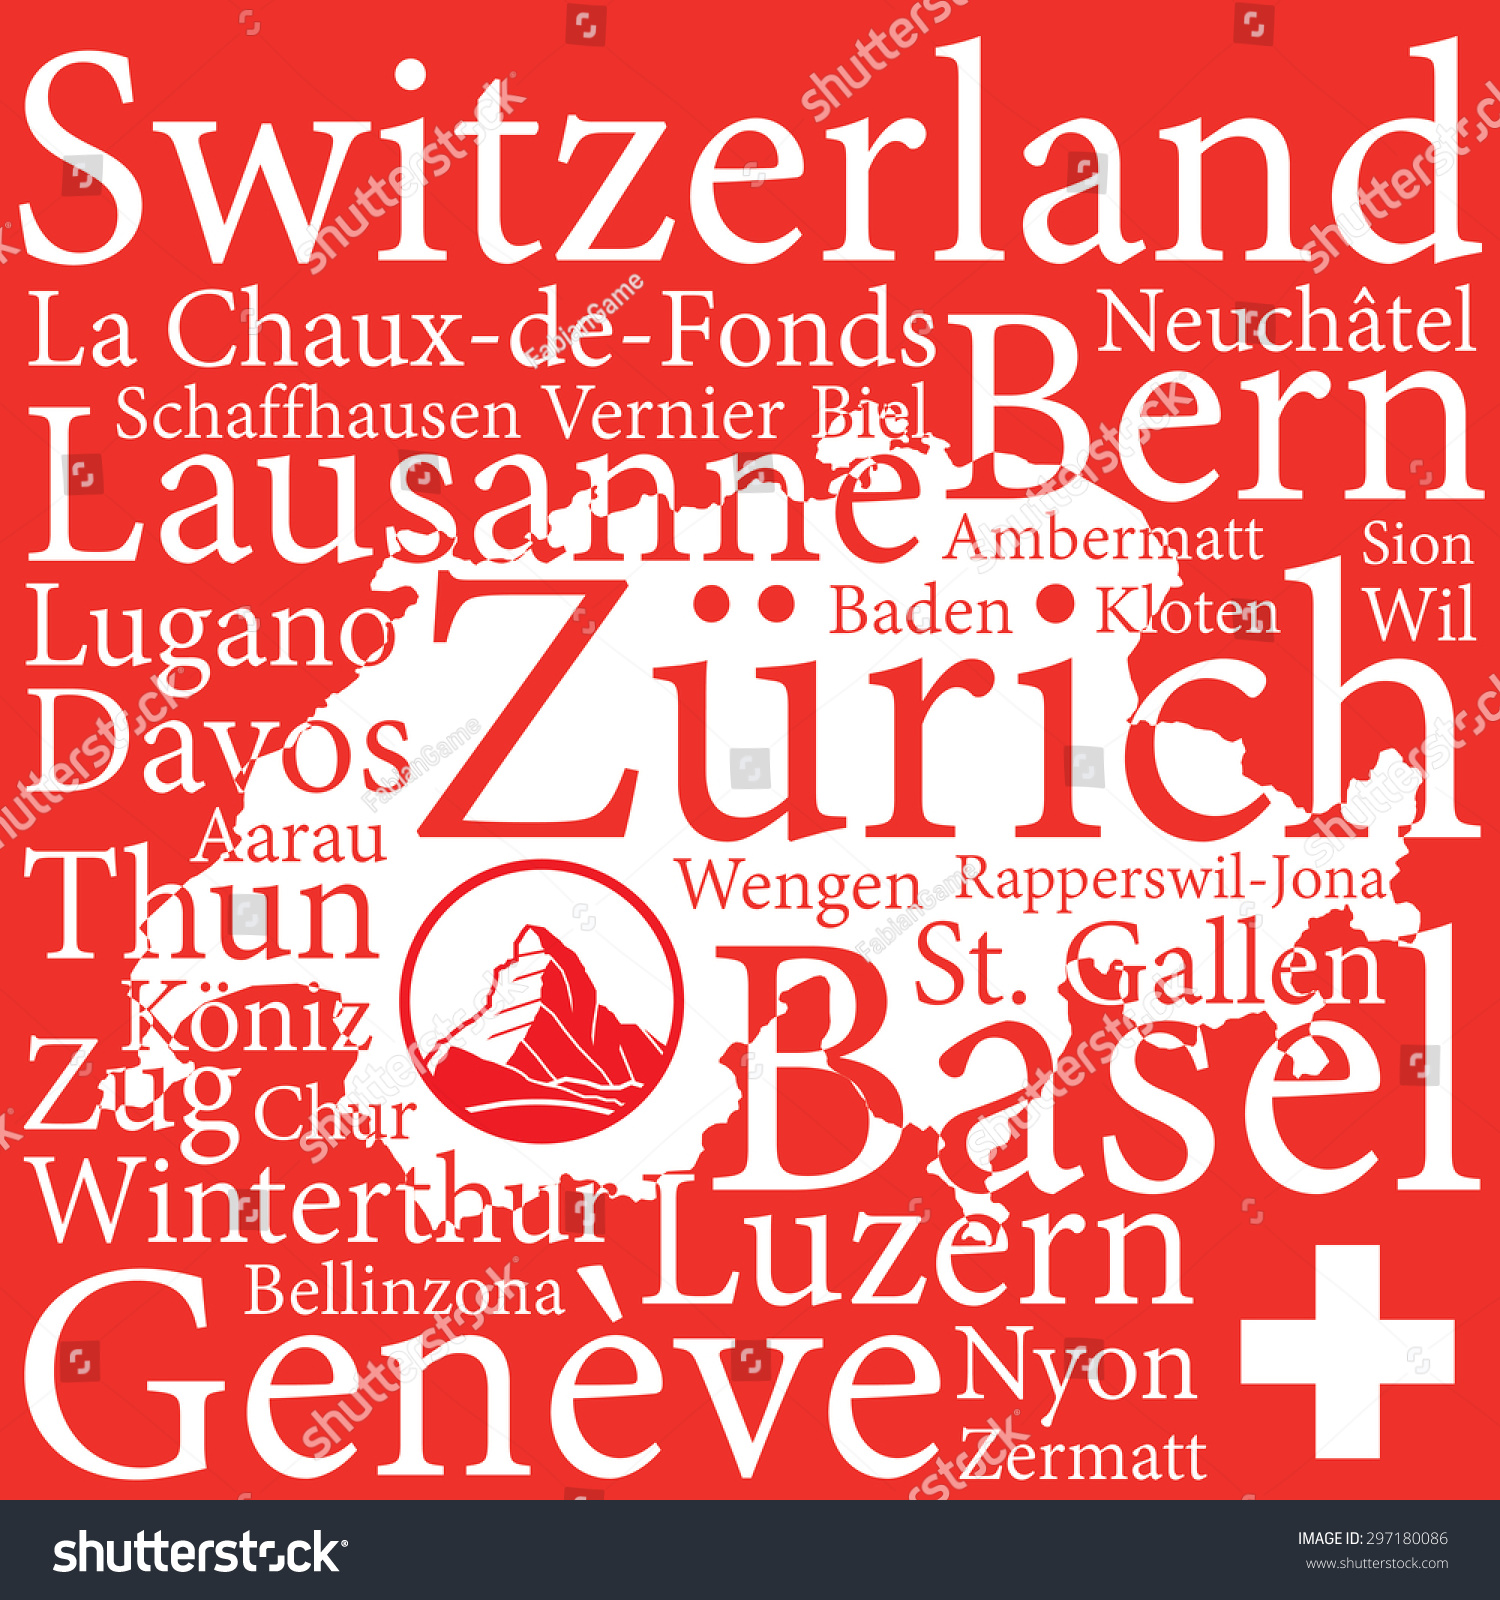 SVG of Switzerland design map with largest cities. svg